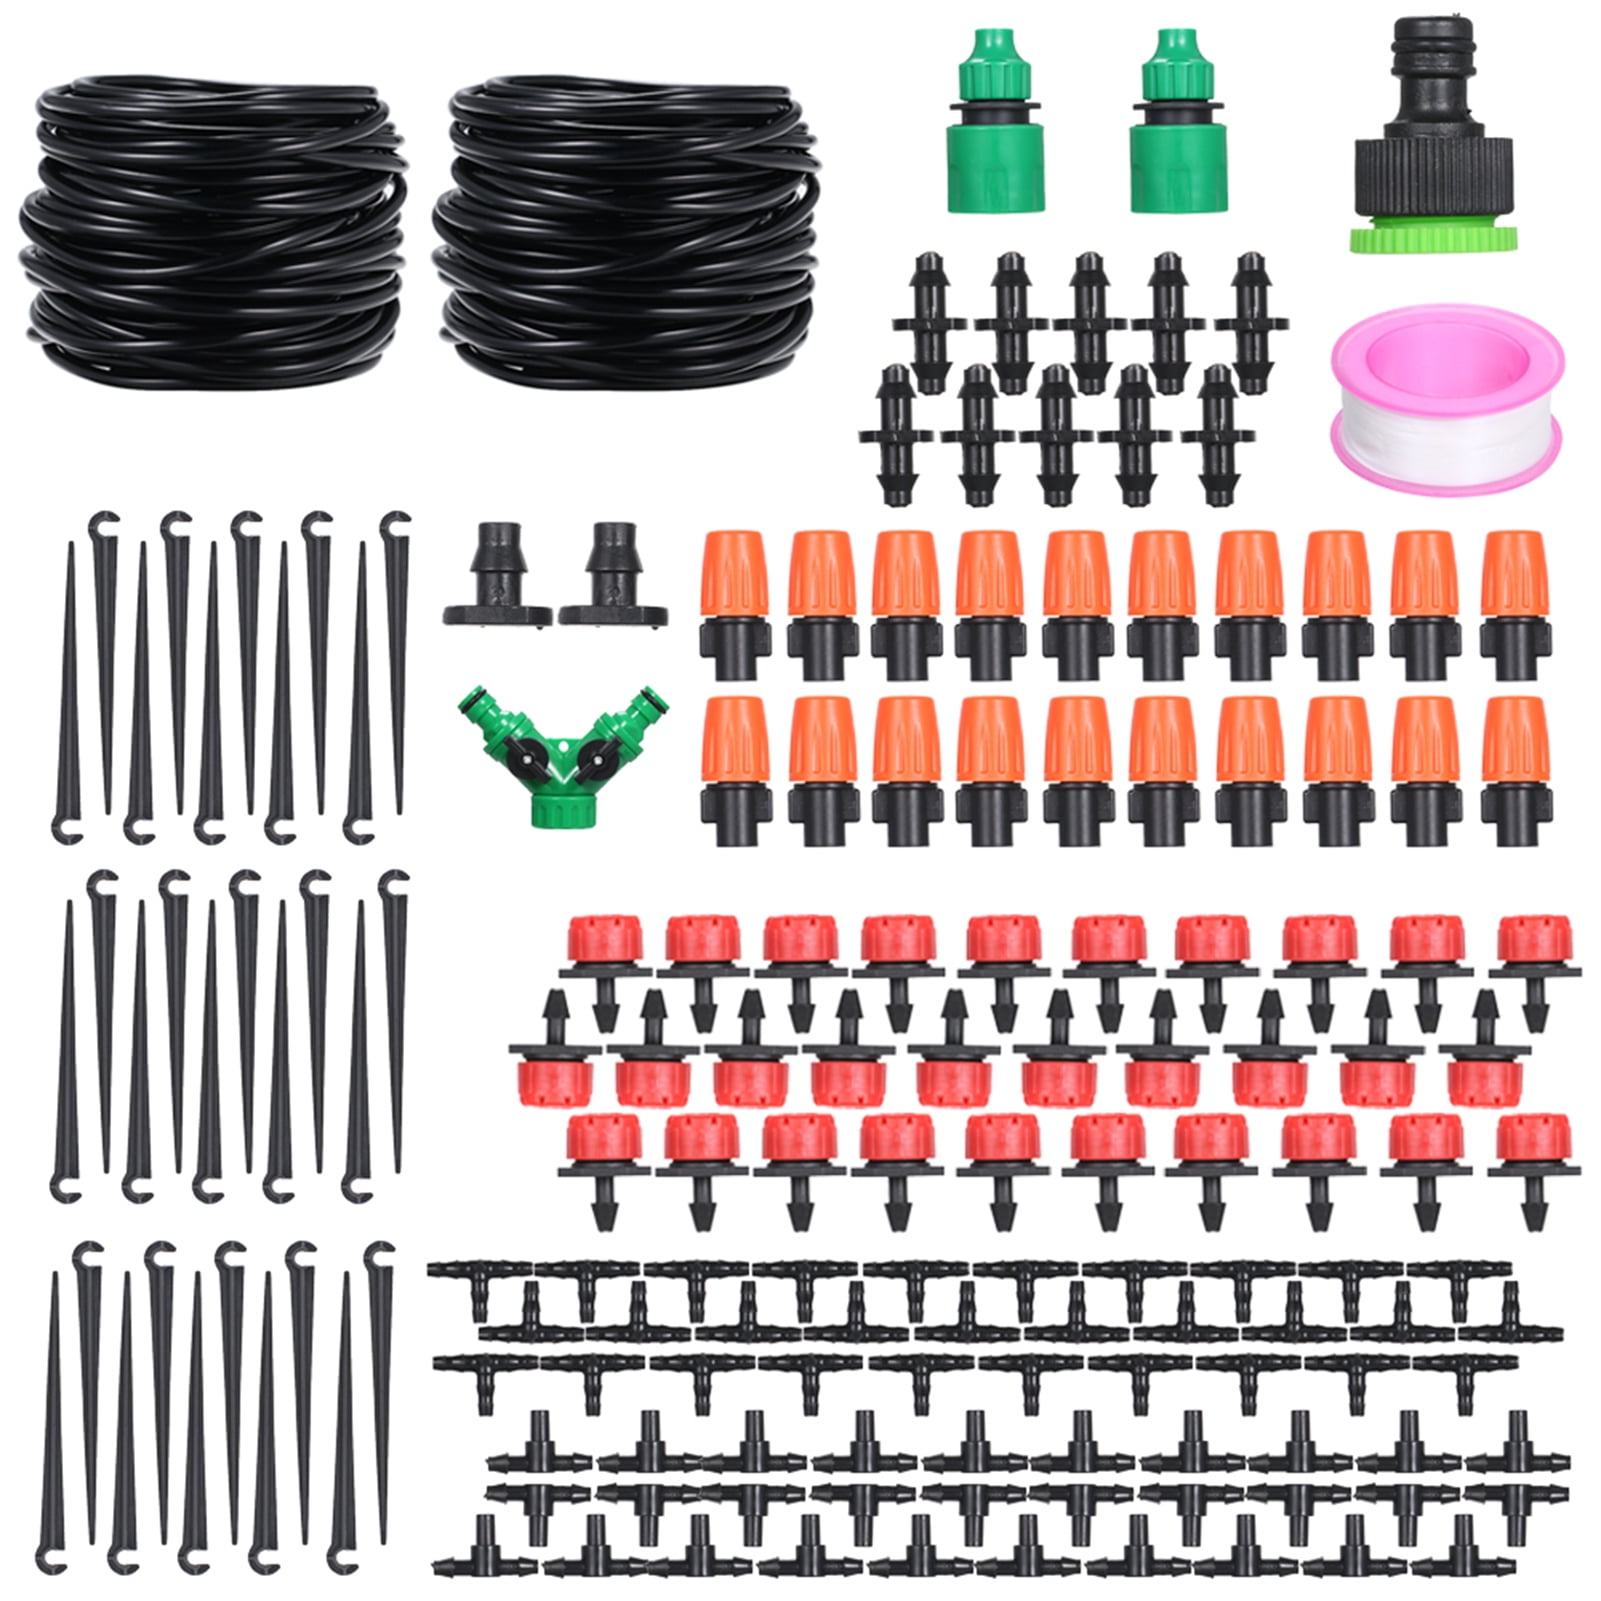 Details about   Drip Garden Micro Watering System Irrigation Kit Greenhouses Self Automatic 50M 